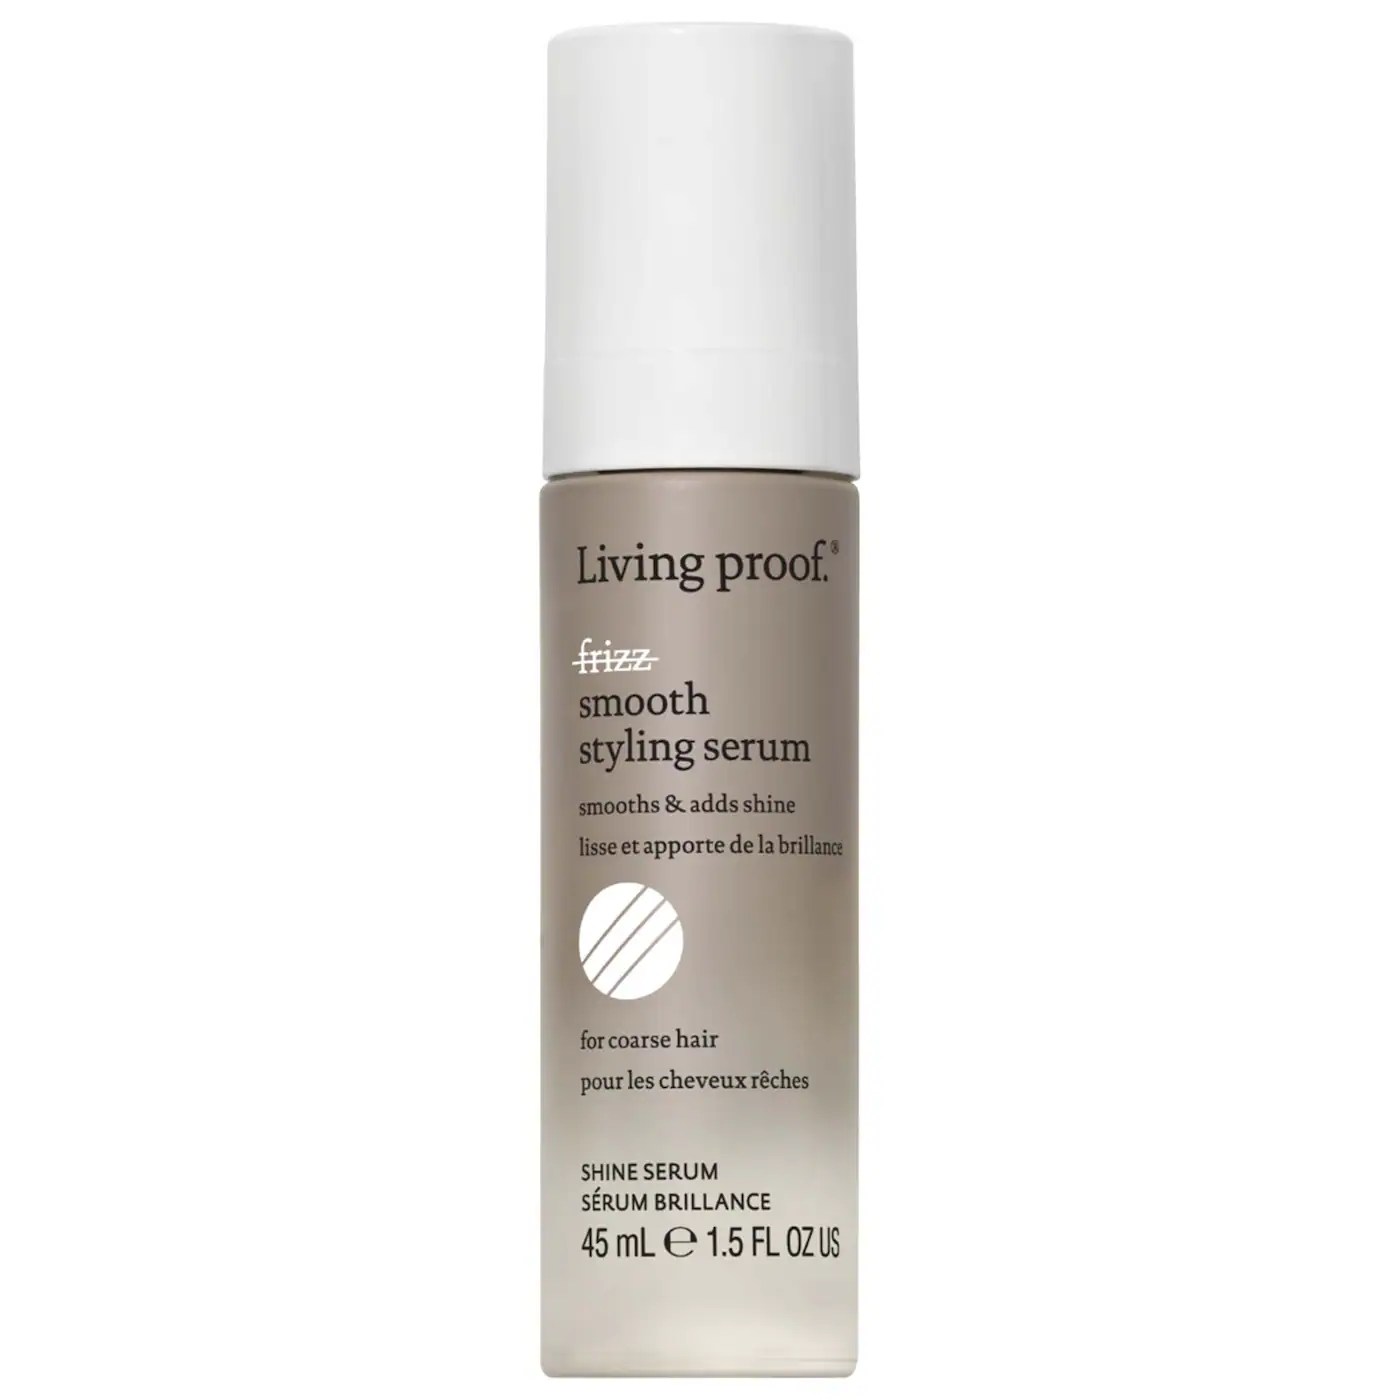 living proof styling serum, one of the best serums for dry hair